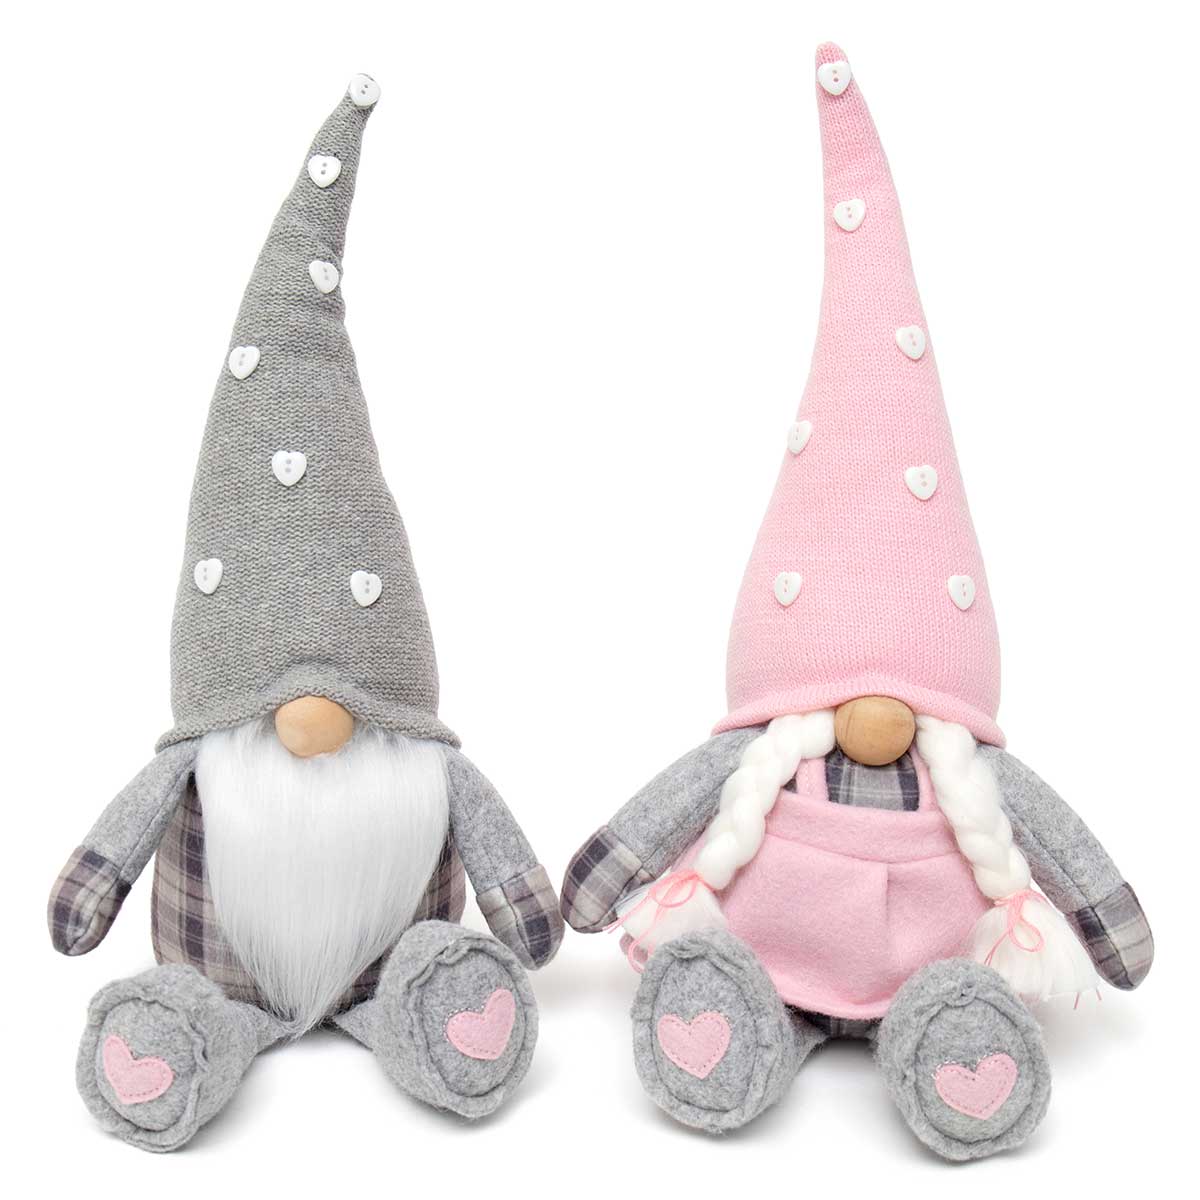 !Button Buddies Gnome Couple with Wood Nose 17"